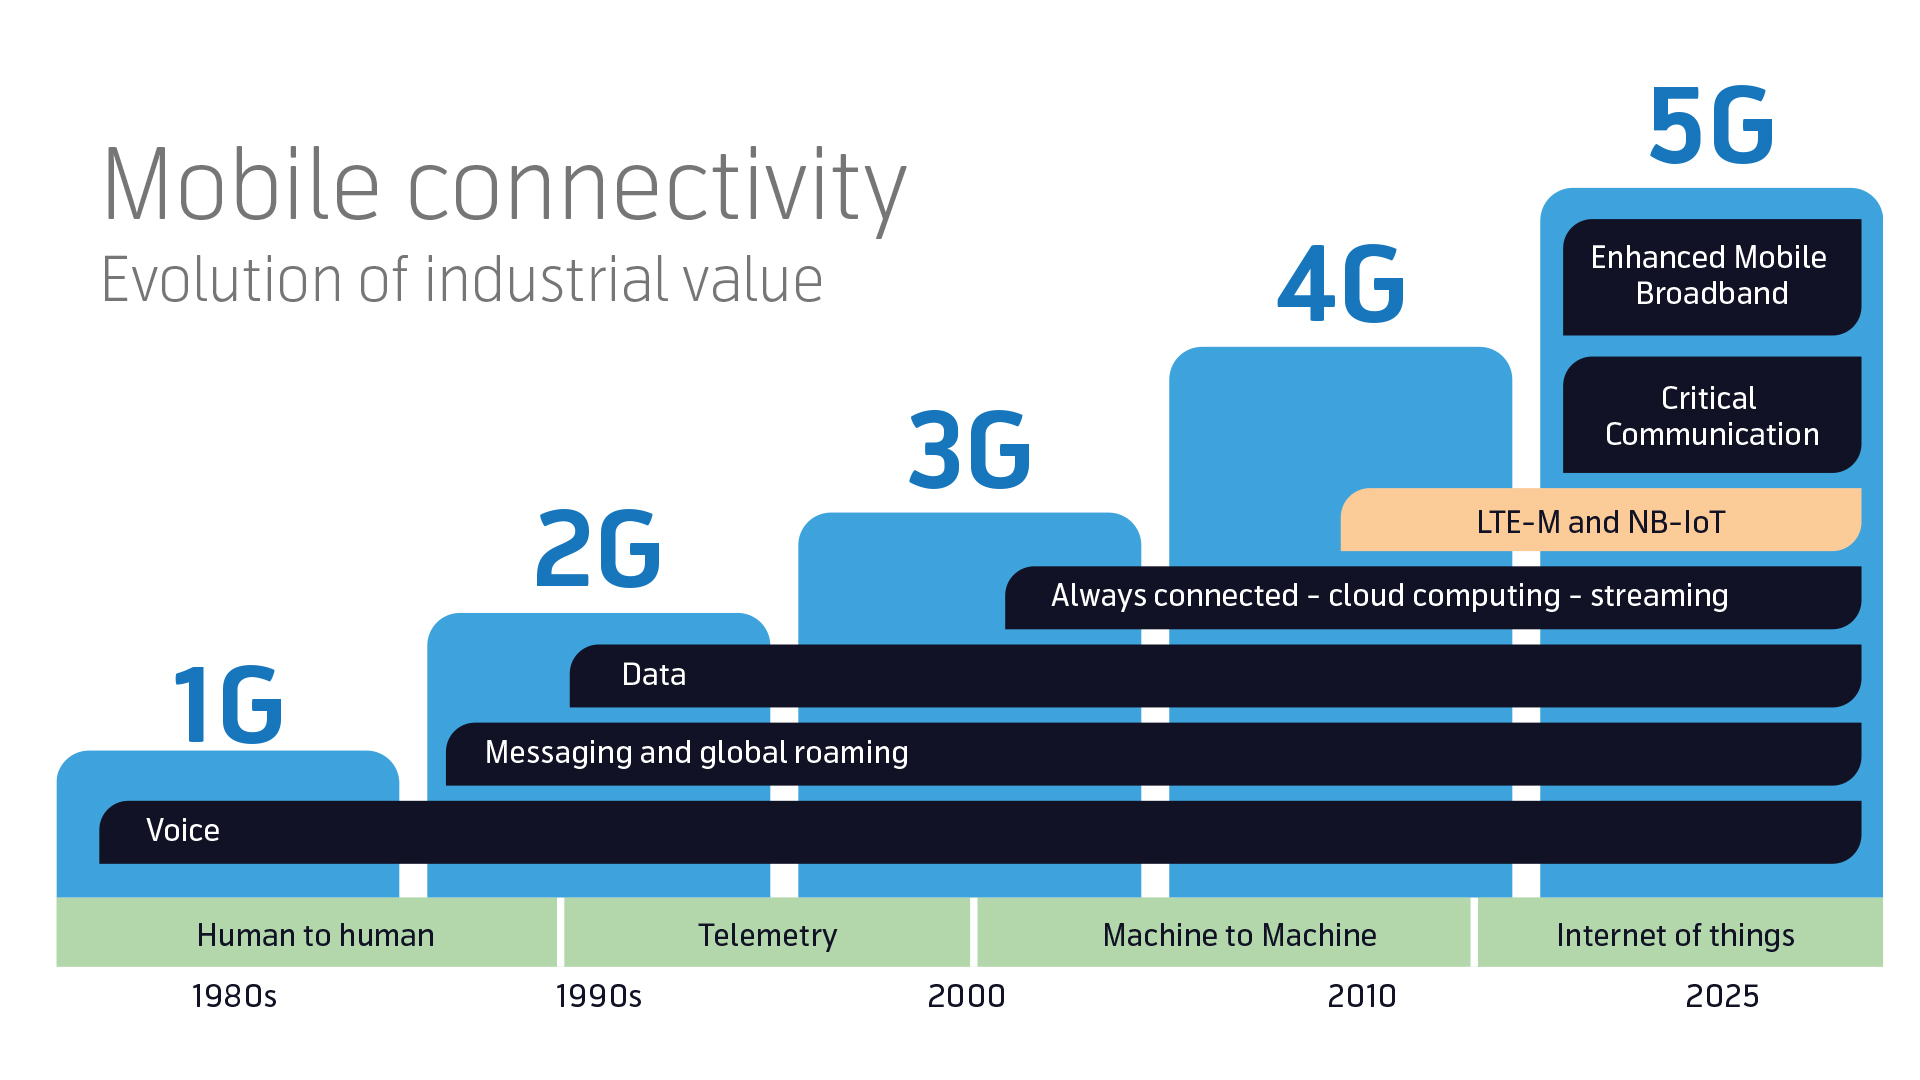 Mobile Connectivity Evolution of Industrial Value